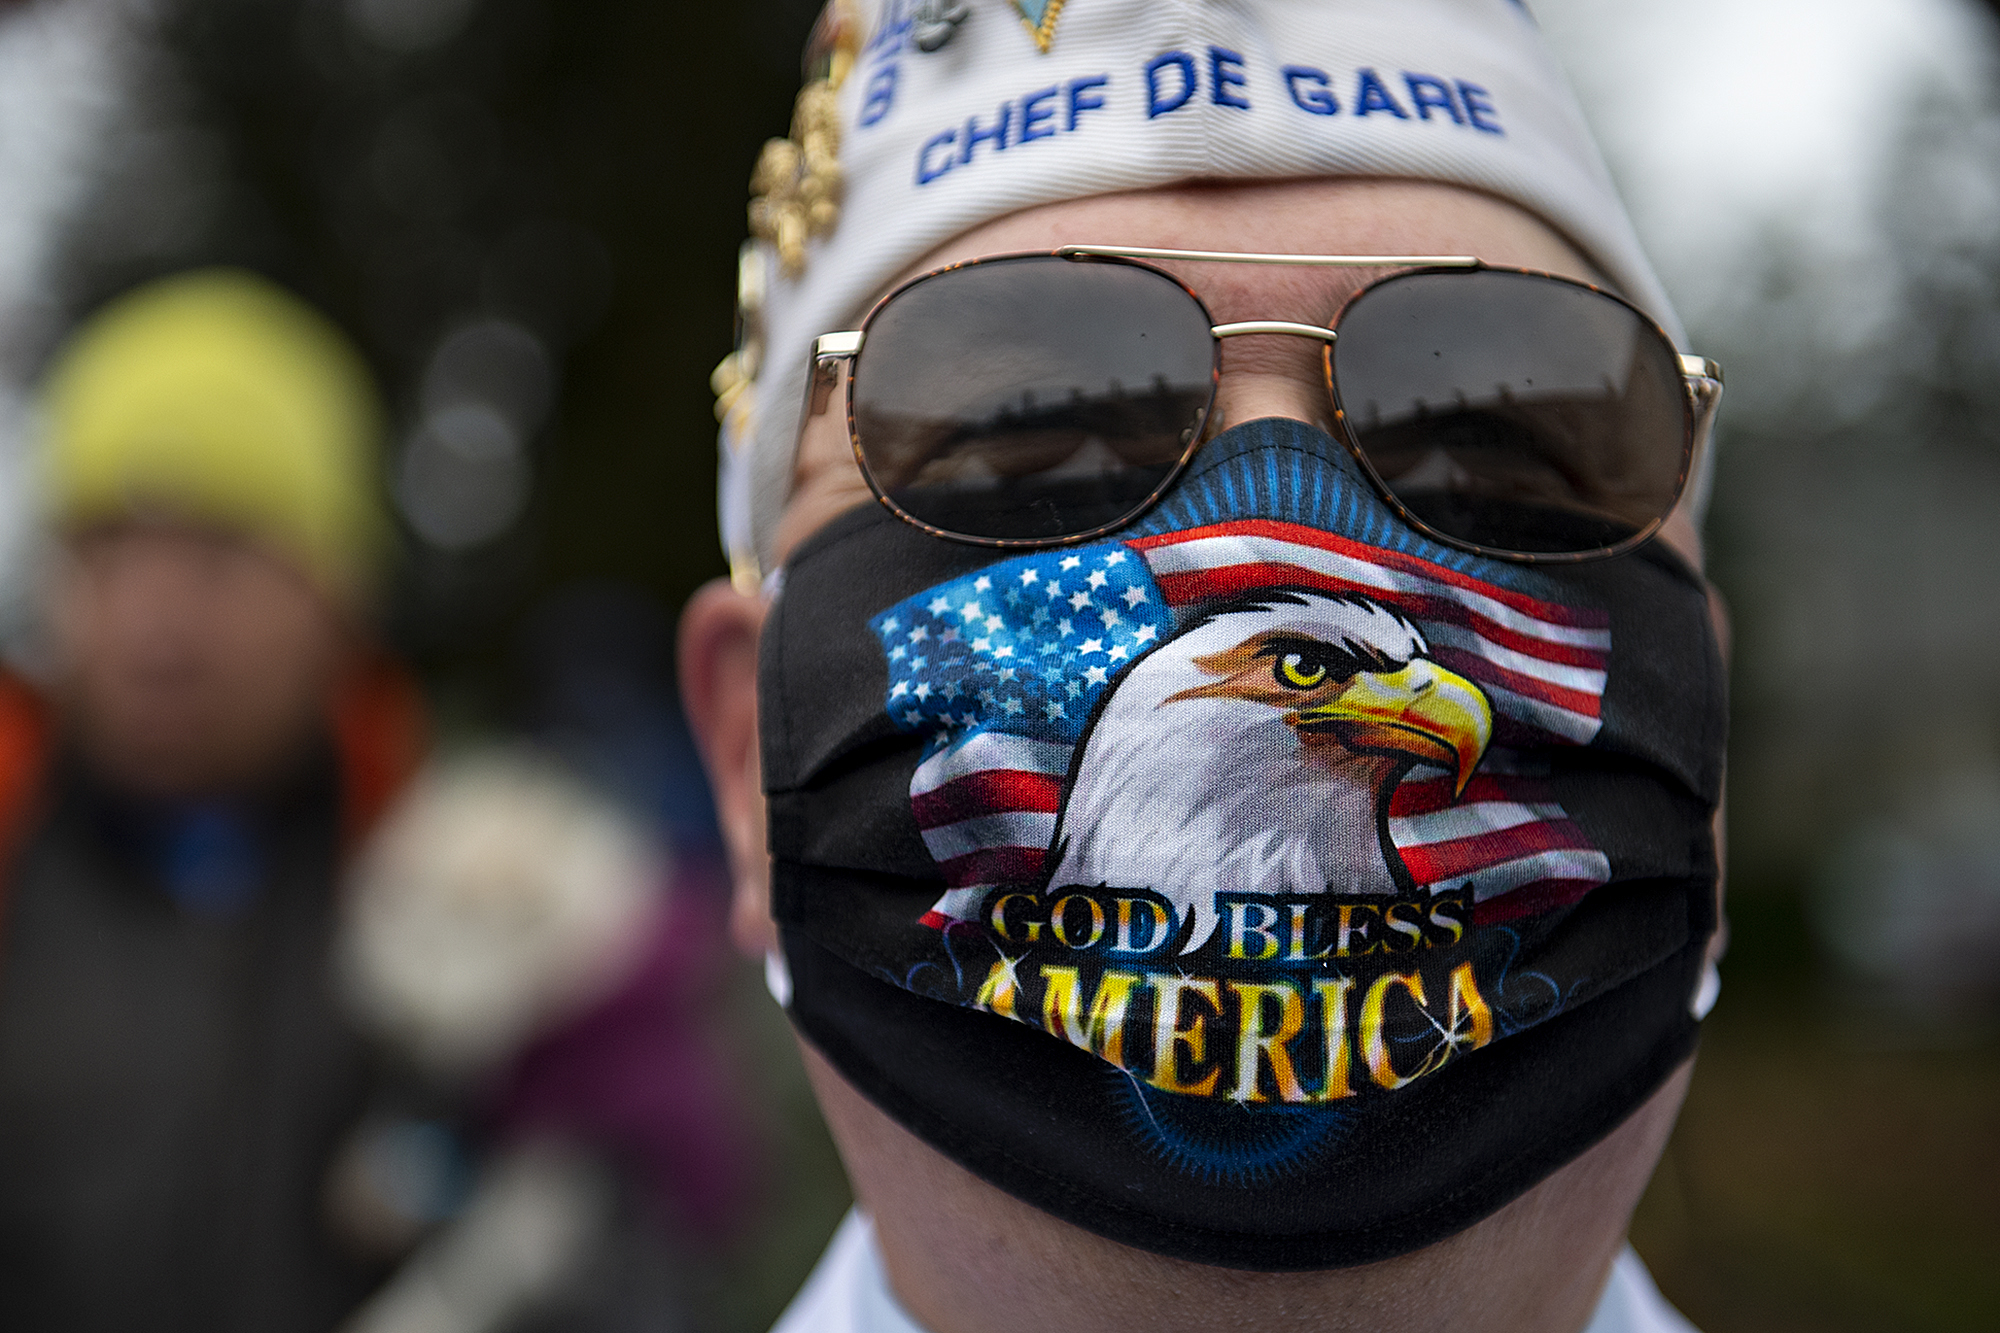 Chef De Gare Cliff Taylor shows his patriotism through his face mask while participating in the Veterans Day Ceremony at the Fort Vancouver Artillery Barracks on Thursday afternoon, Nov. 11, 2021.